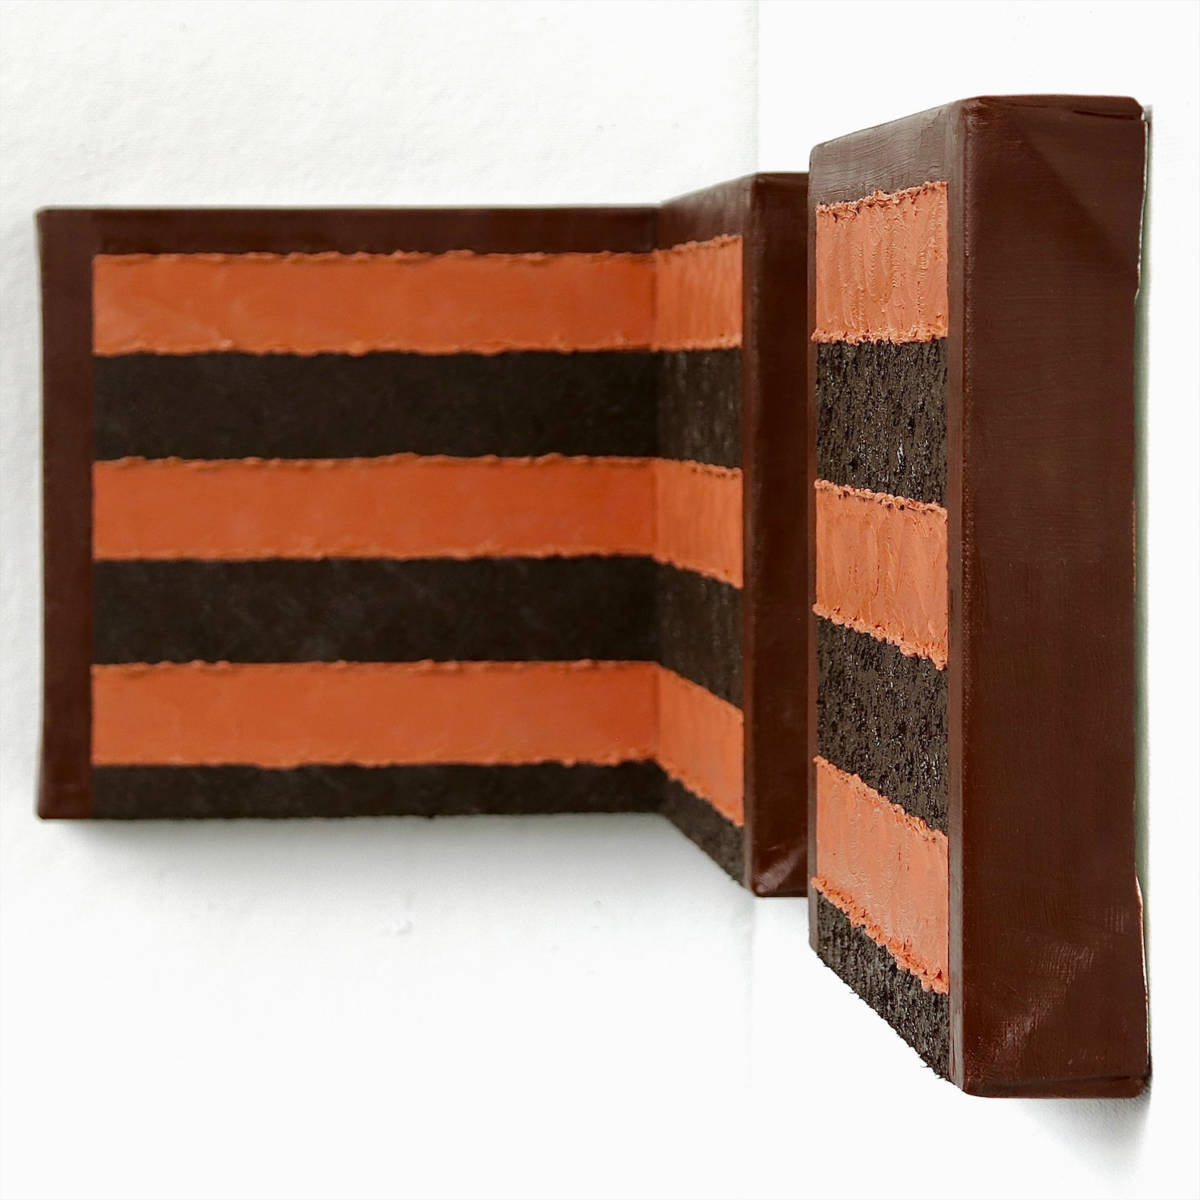 An impasto triptych of a chocolate cake that is installed in the corner